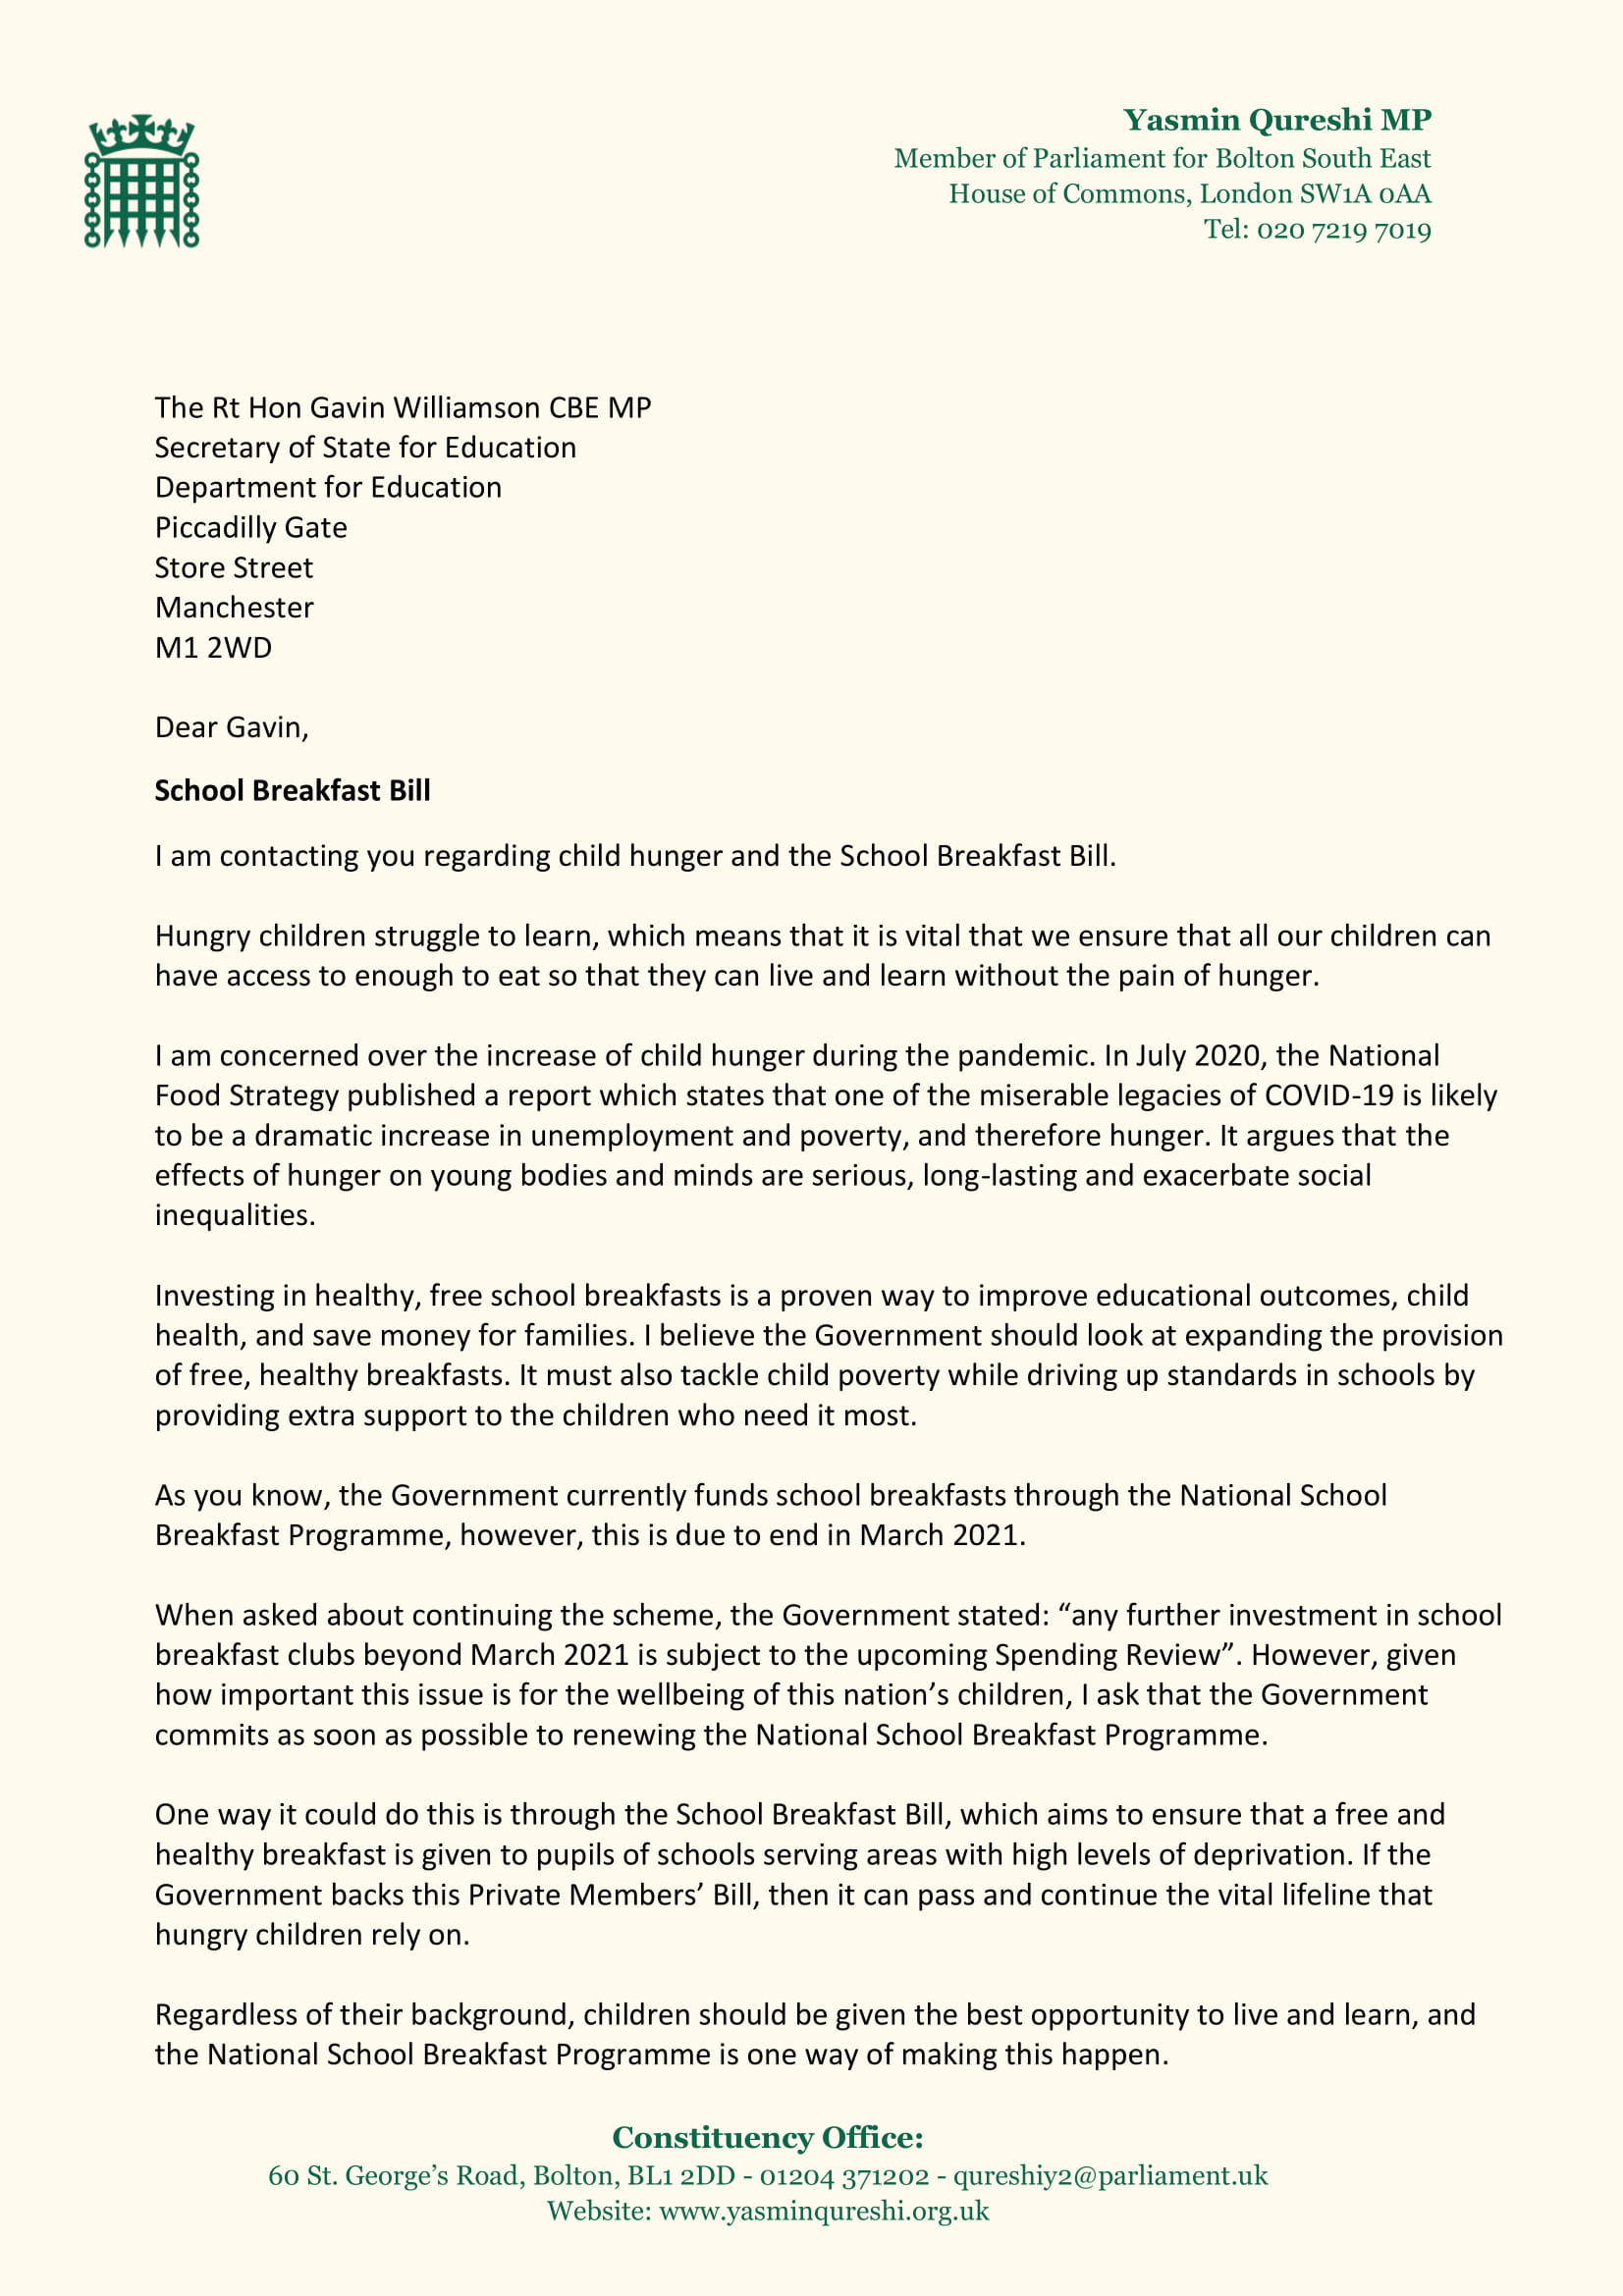 Letter to Gavin Williamson Page 1